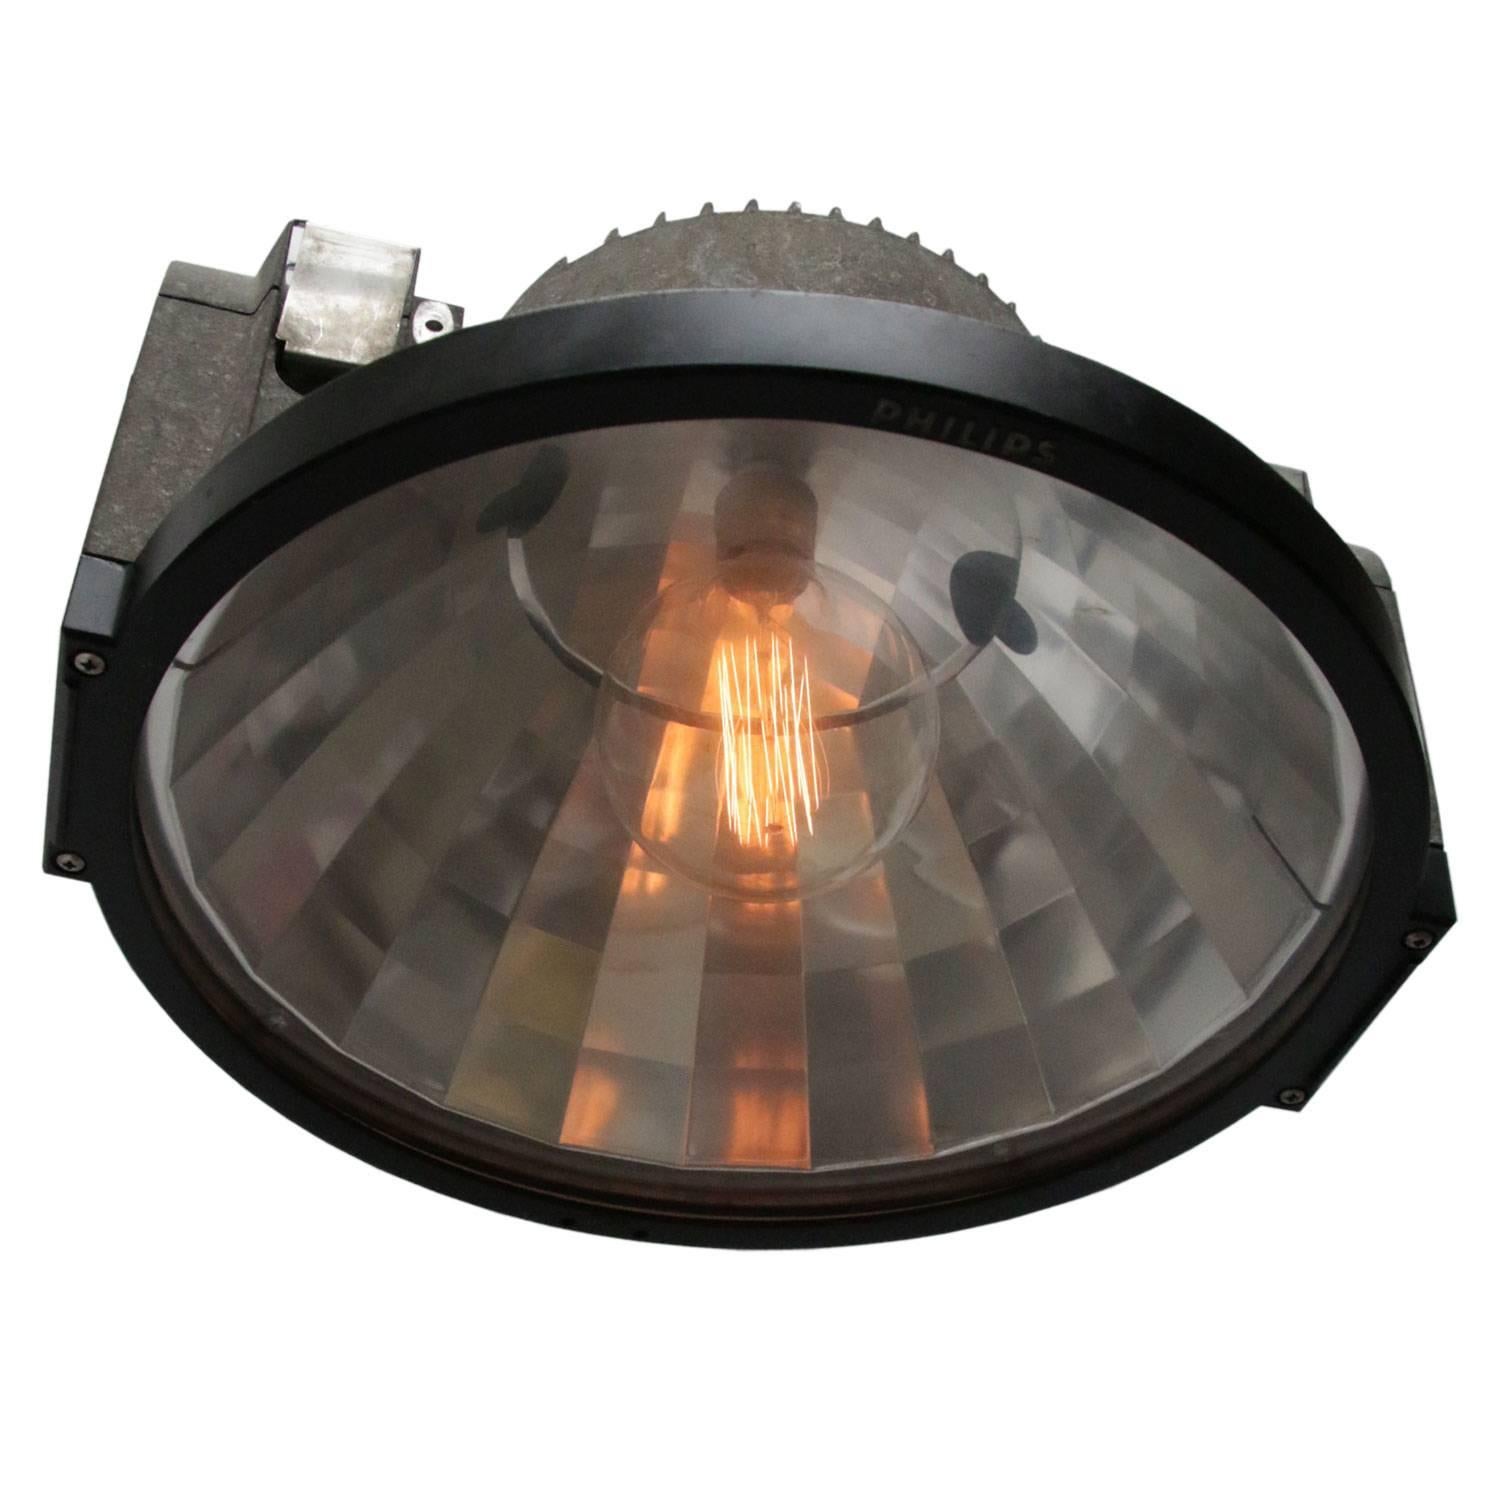 Field light. Stadium lamp from Amsterdam.
Cast aluminium with clear glass. Blocked mirror inside.

Measure: Weight 7.2 kg / 15.9 lb

All lamps have been made suitable by international standards for incandescent light bulbs, energy-efficient and